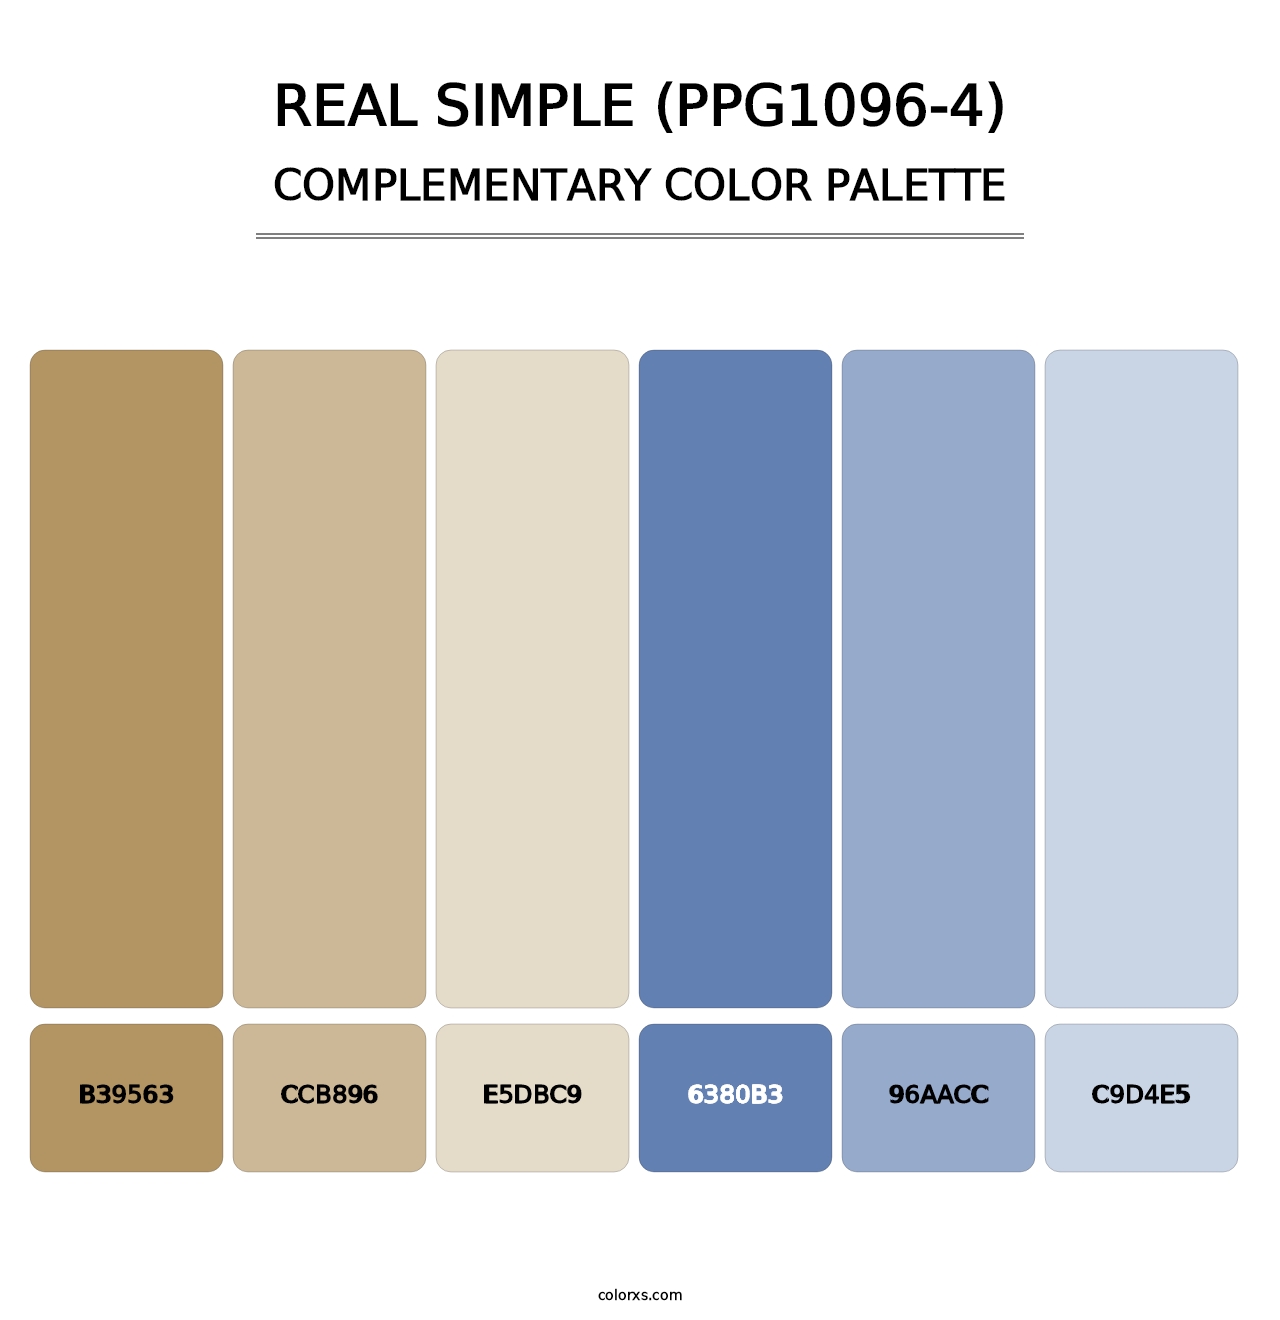 Real Simple (PPG1096-4) - Complementary Color Palette